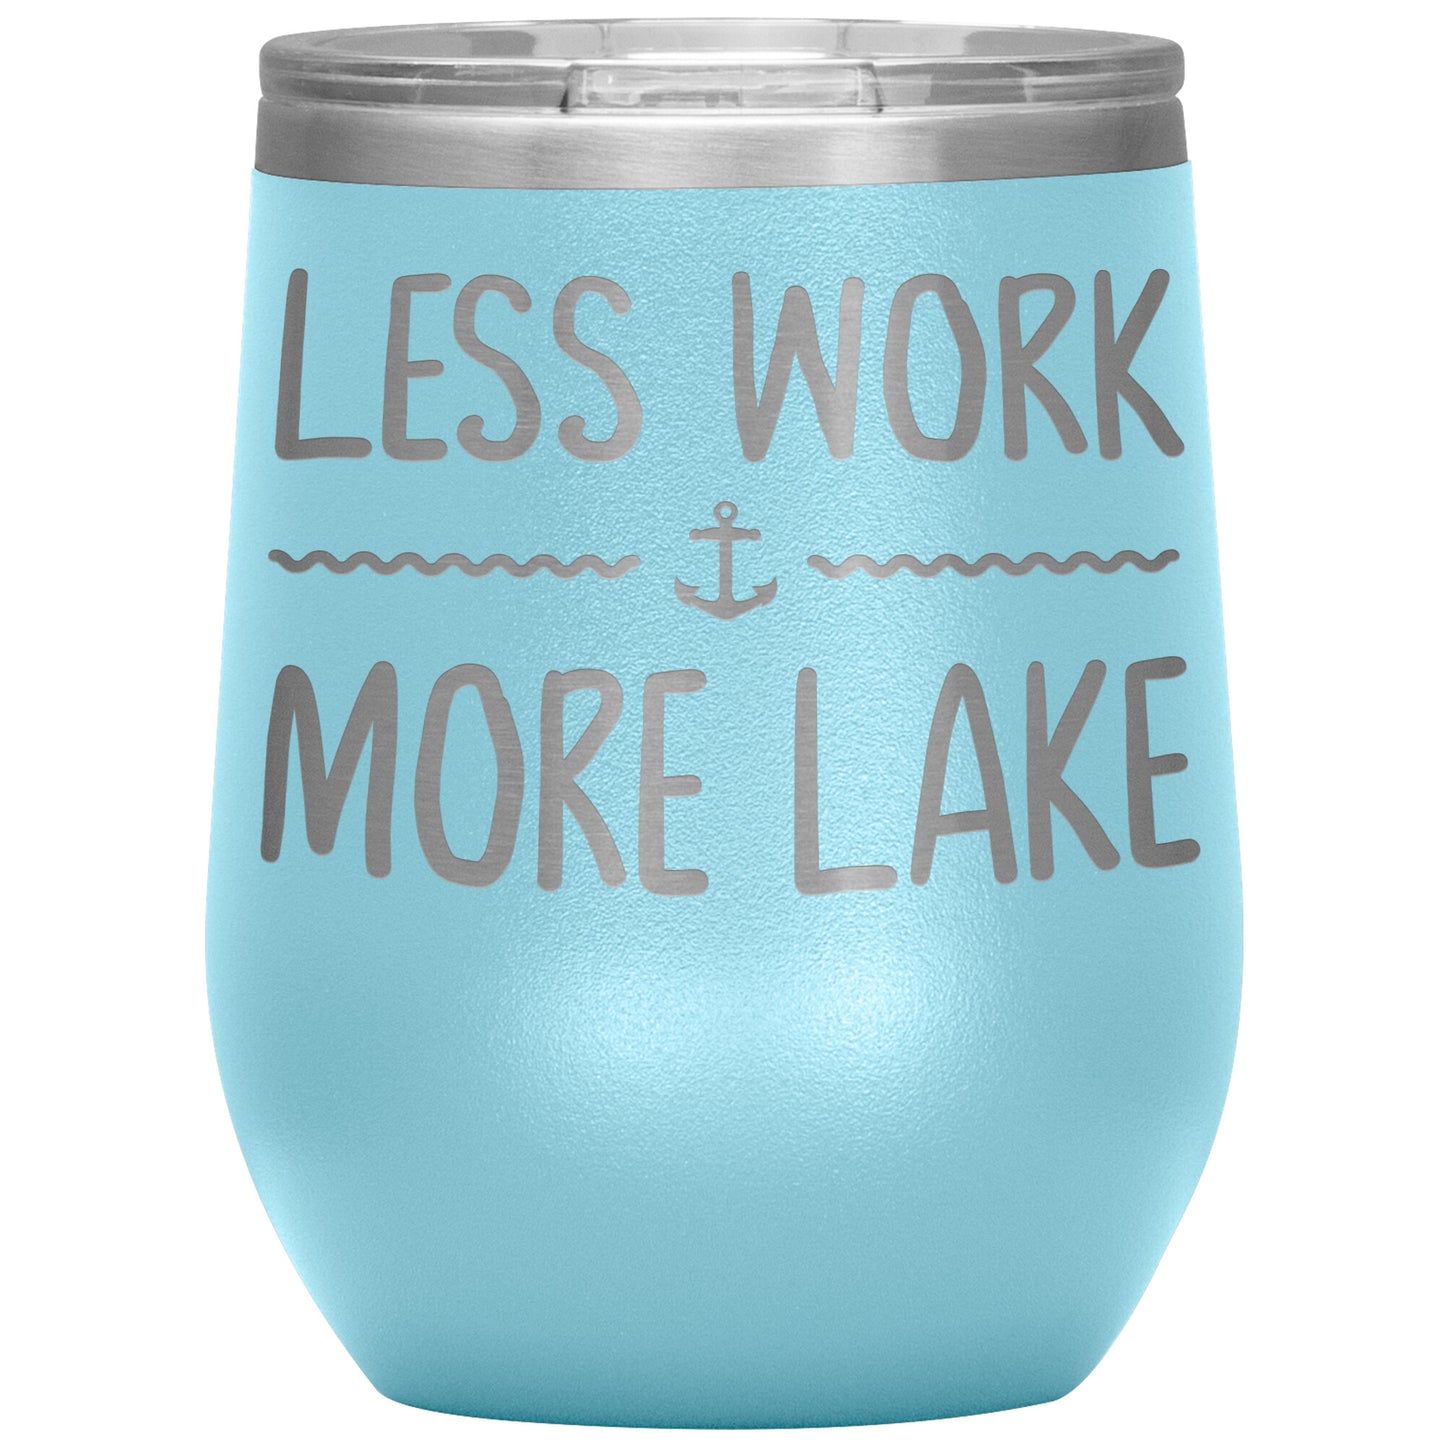 Less Work More Lake 12oz Wine Tumbler - Funny Stemless Cup